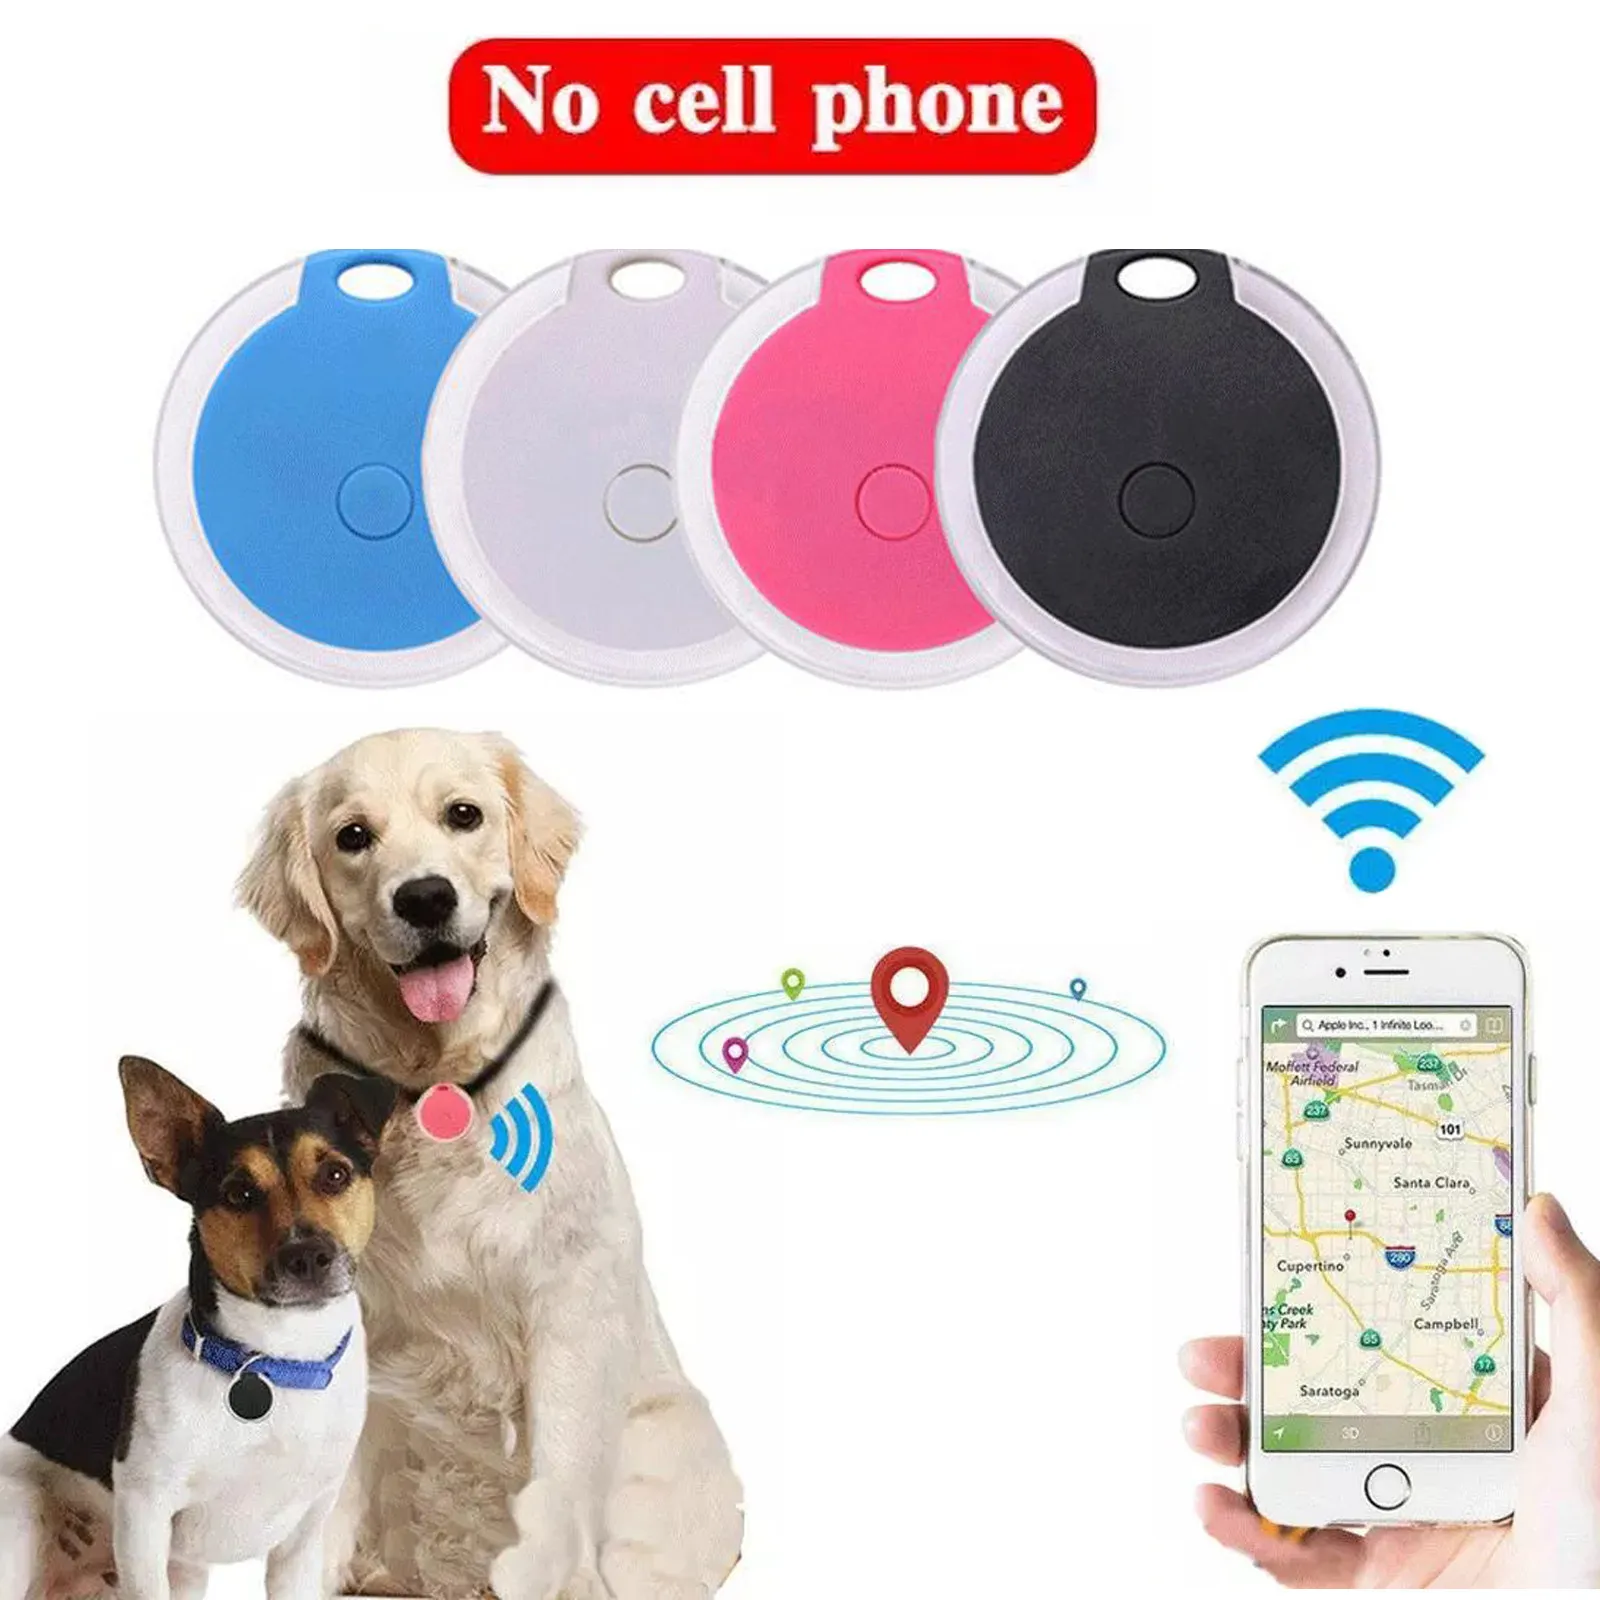 

Gps Tracker Mini Tracking Device Cat Dog Loss Prevention Waterproof Device For Pet Cat Kids Car Wallet Finder Collar Gps Locator